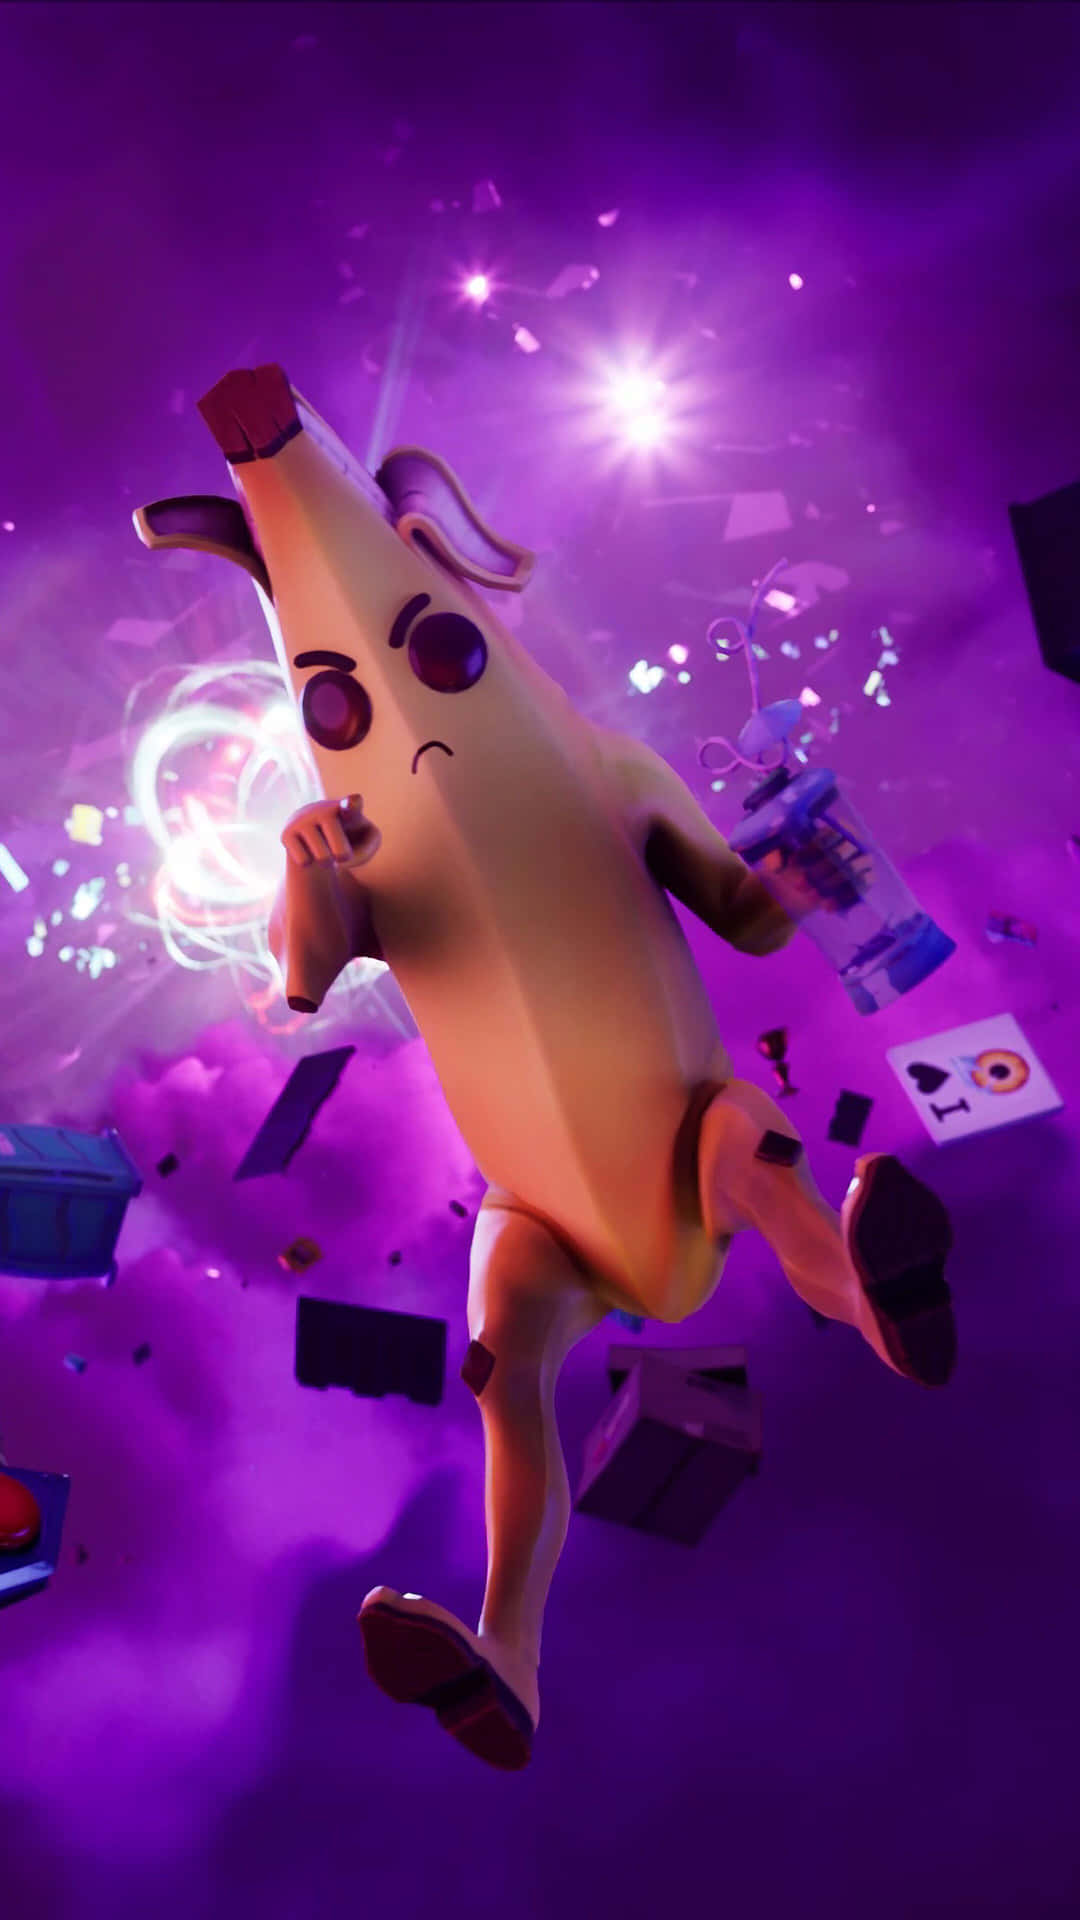 The coolest character in Fortnite? Peely! Wallpaper